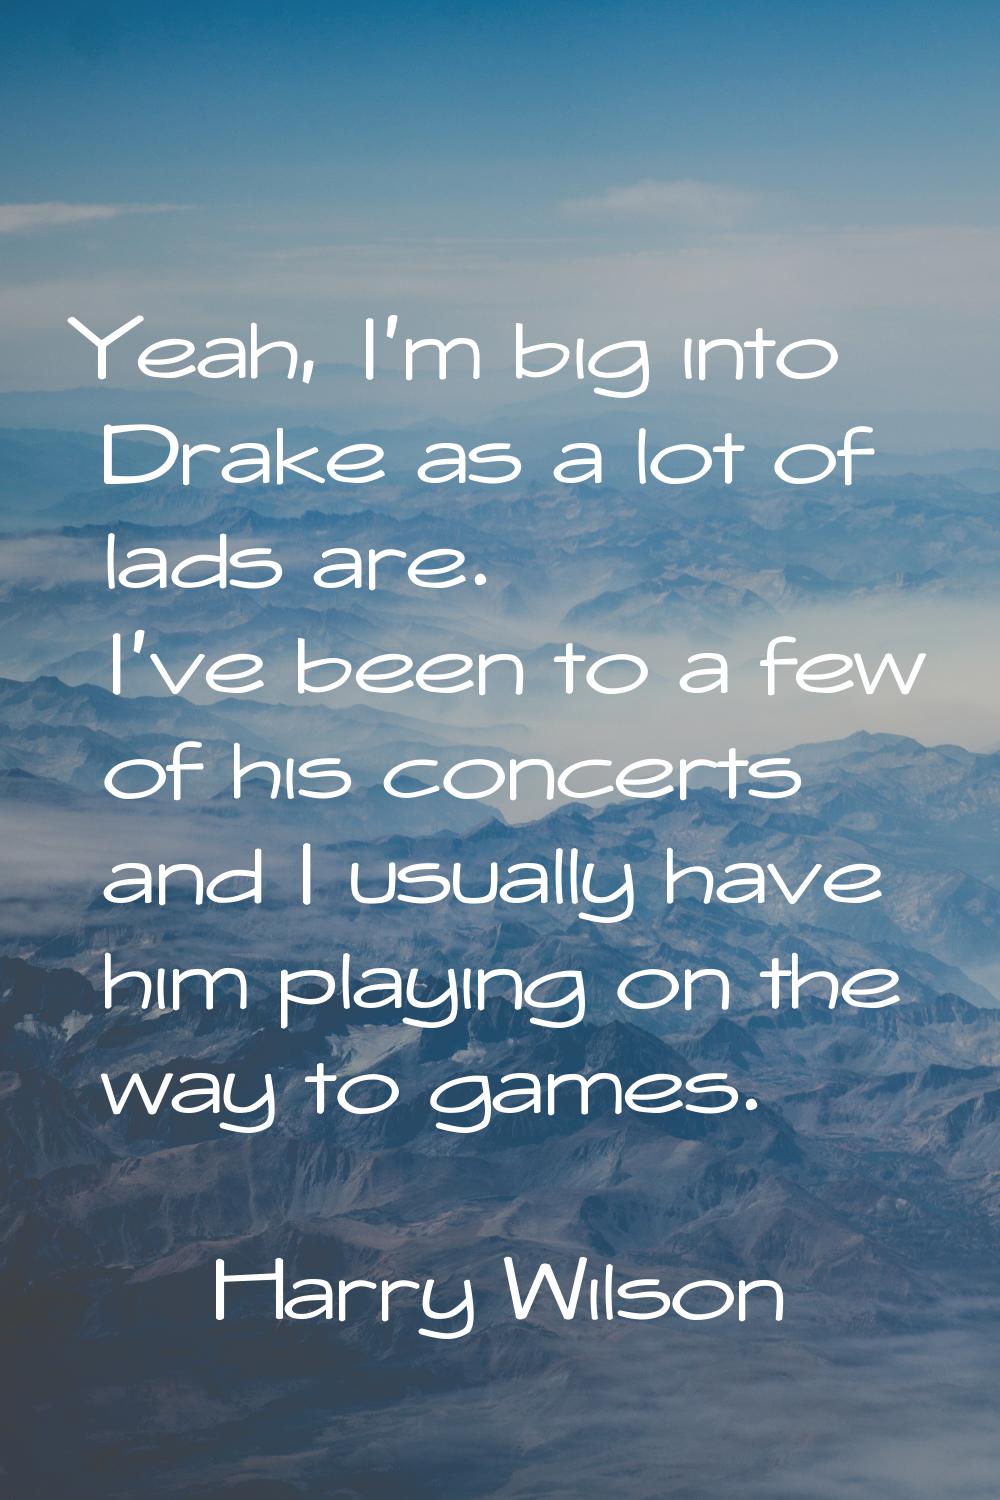 Yeah, I'm big into Drake as a lot of lads are. I've been to a few of his concerts and I usually hav